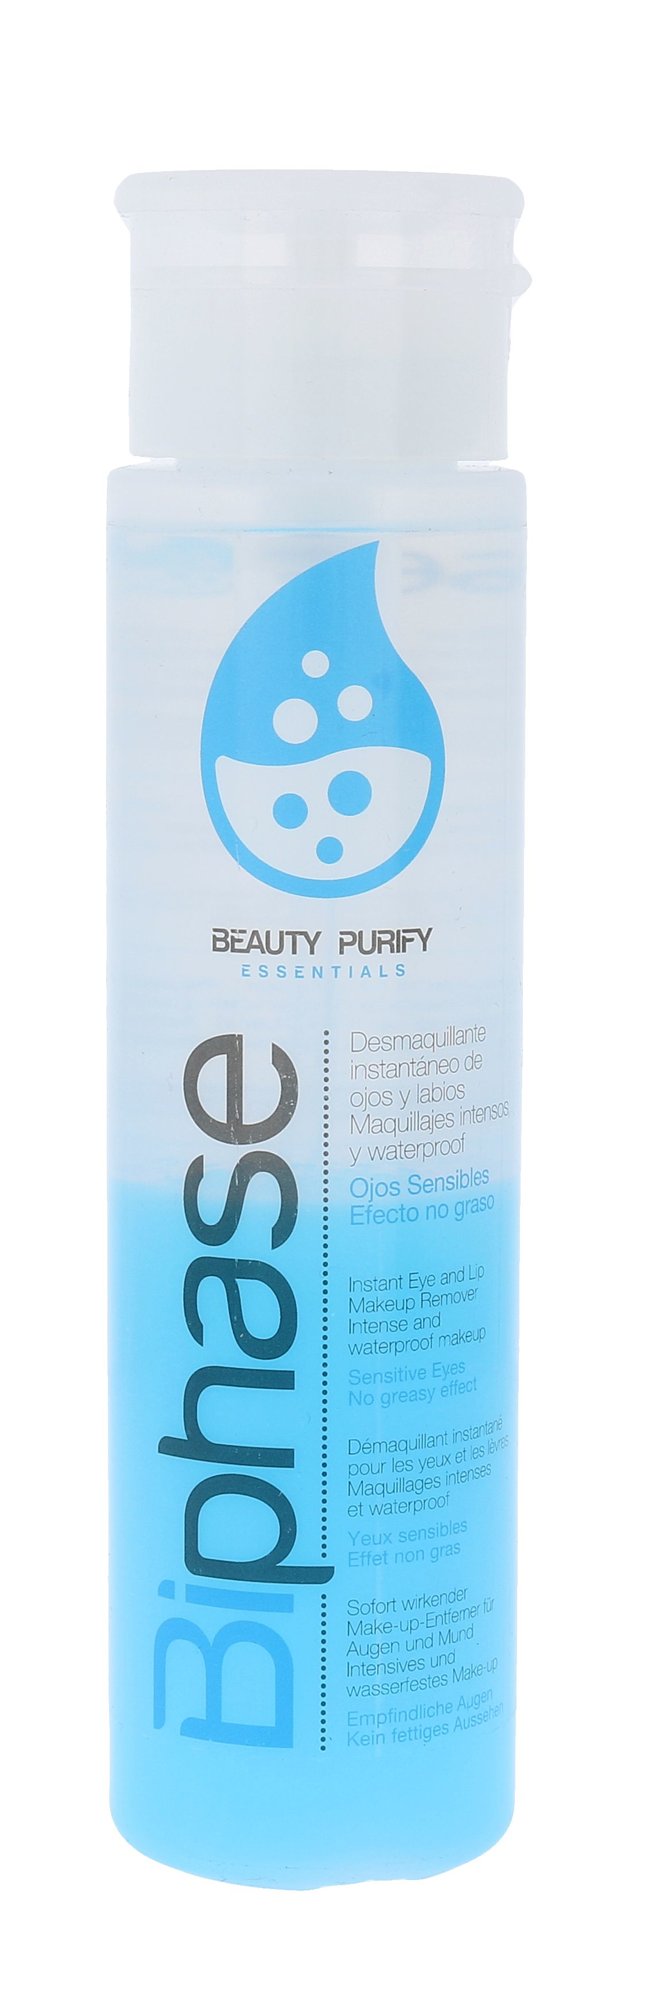 Diet Esthetic Biphase Beauty Purify Make Up Remover